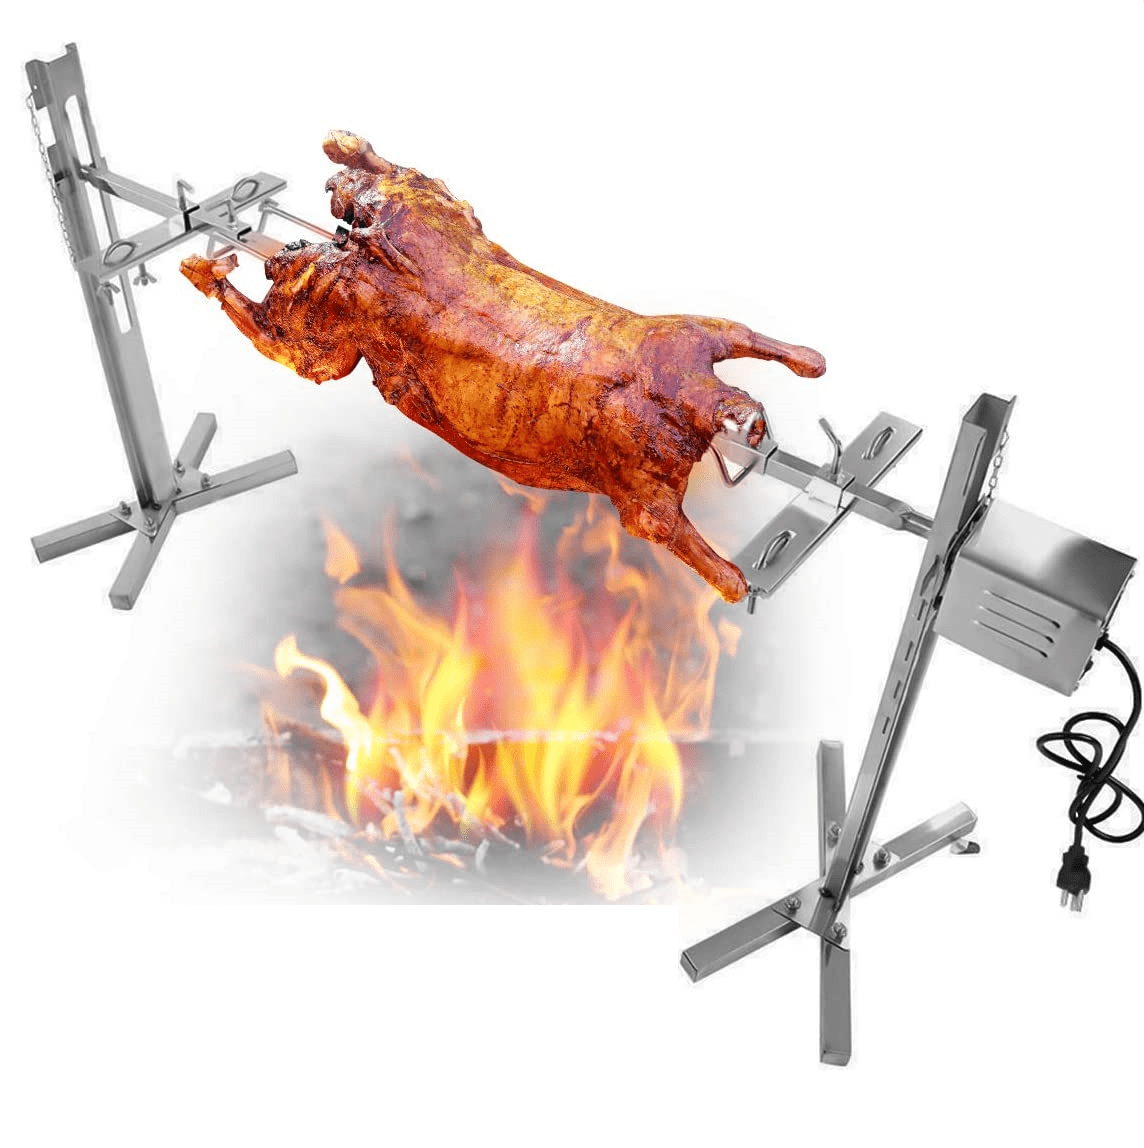 46" Large Stainless Steel BBQ Pig Lamb Chicken Spit Roaster Rotisserie Cooking 